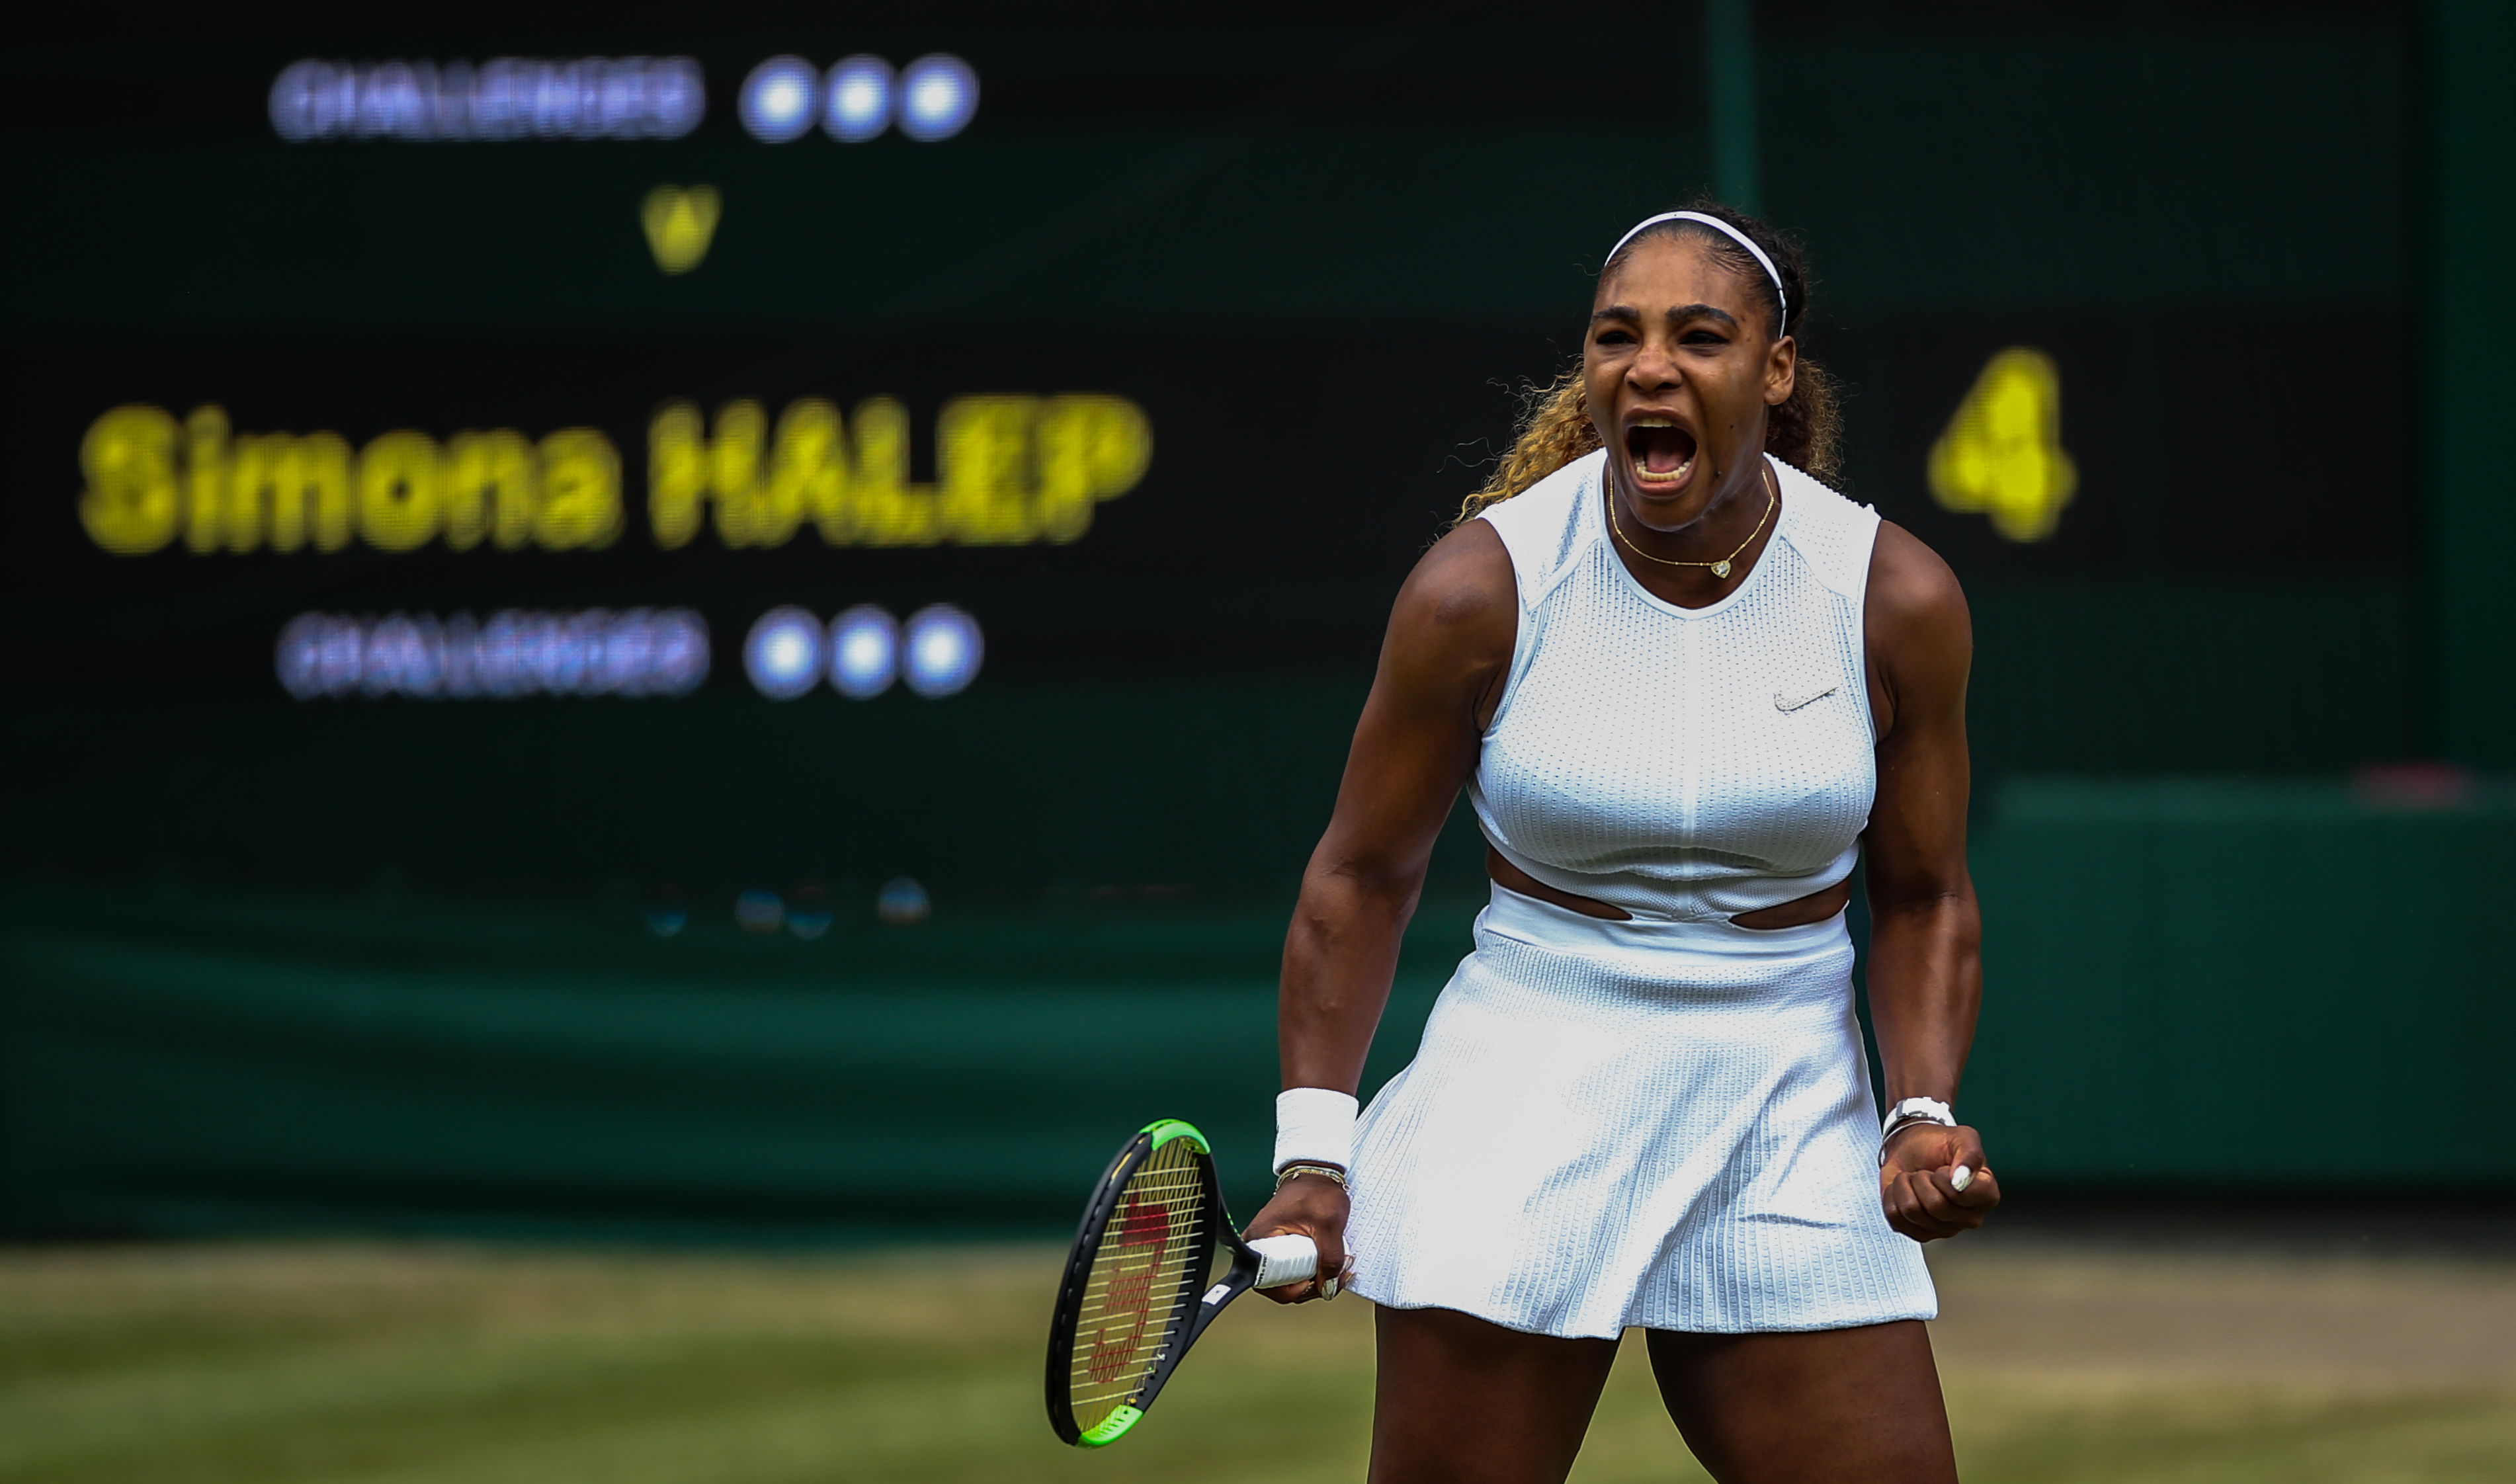 Serena Williams reacts during the women's singles final on day twelve of the Wimbledon Championships at the All England Lawn Tennis and Croquet Club, Wimbledo